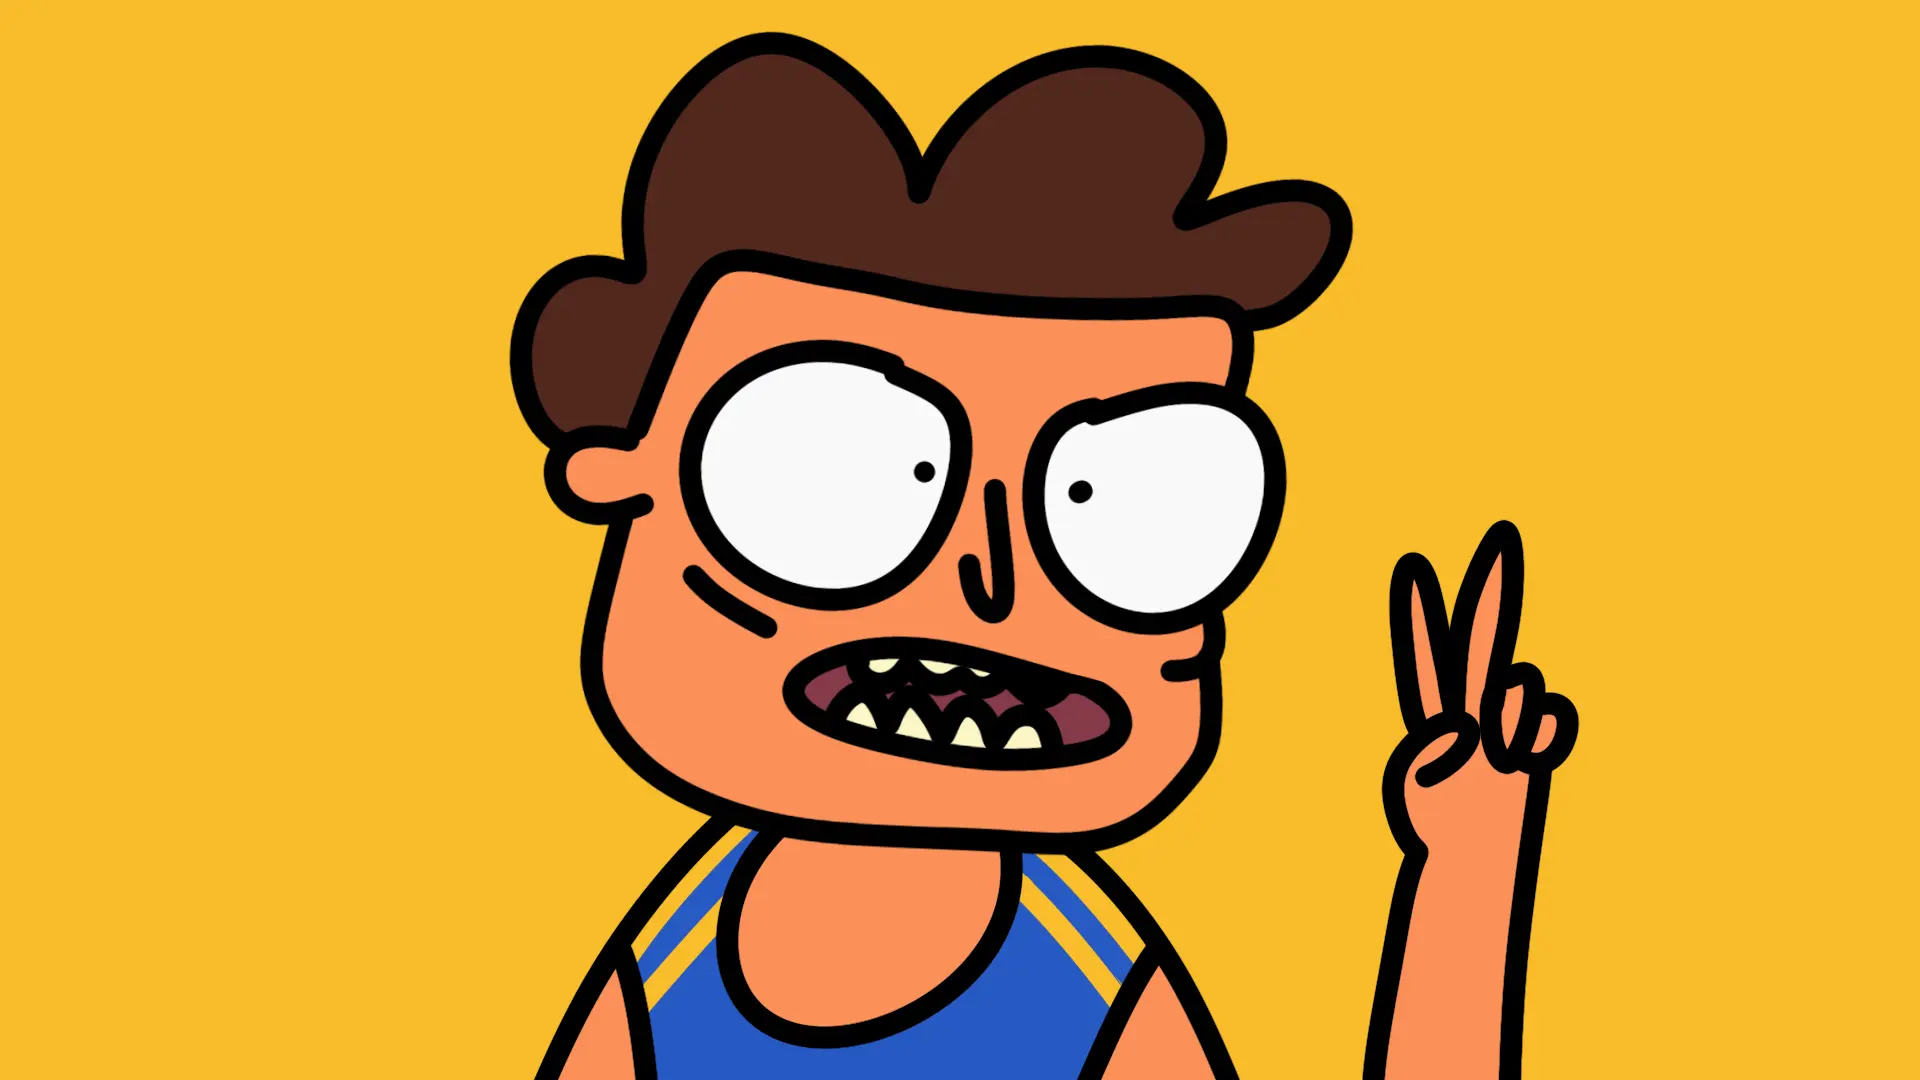 Frame by Frame Animation character showing the peace sign